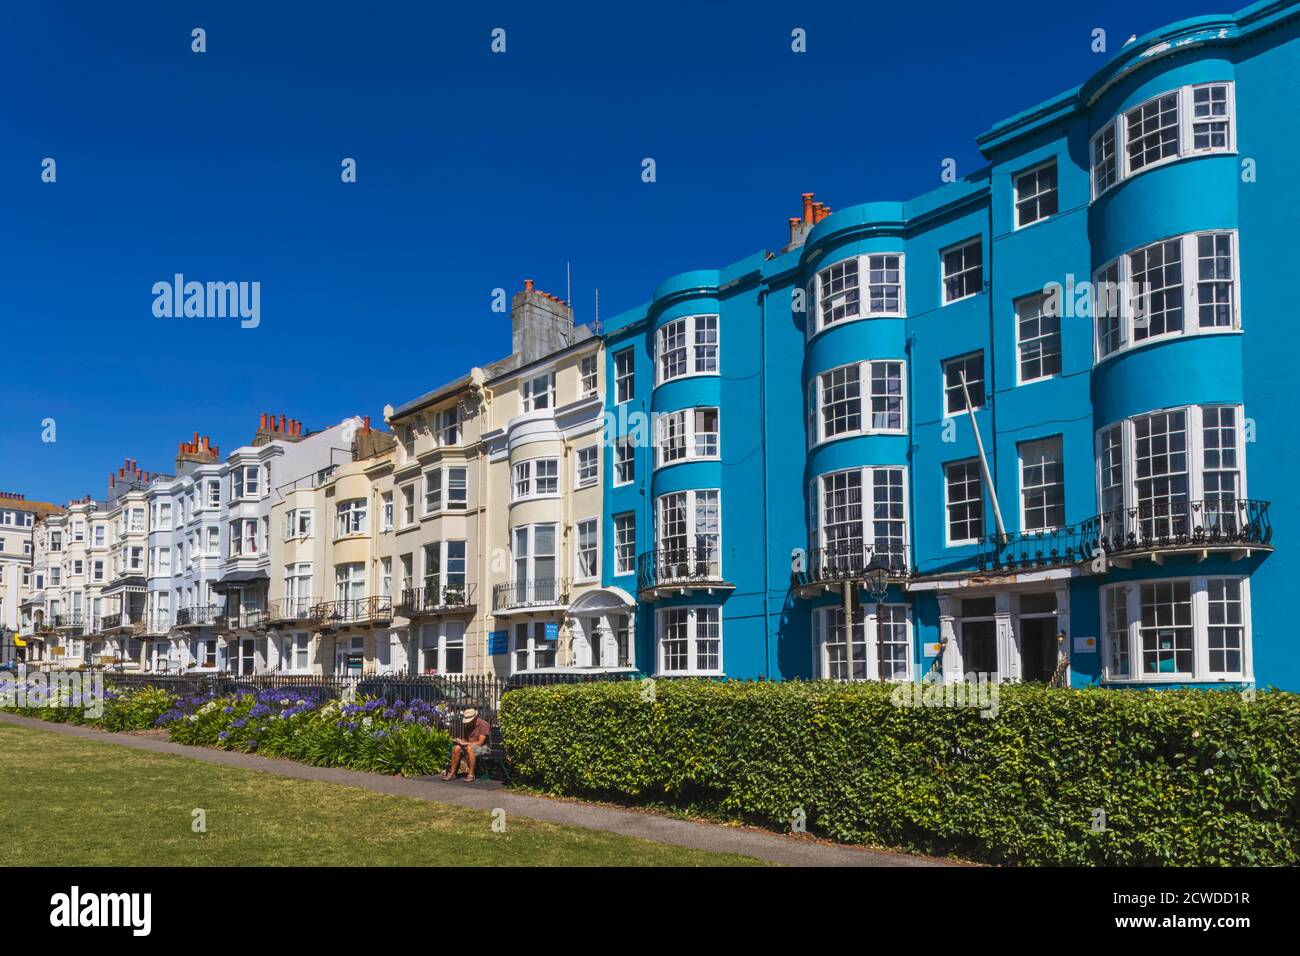 England, East Sussex, Brighton, Kemptown, The New Steine Gardens and Colourful Hotels and Residential Buildings Stock Photo